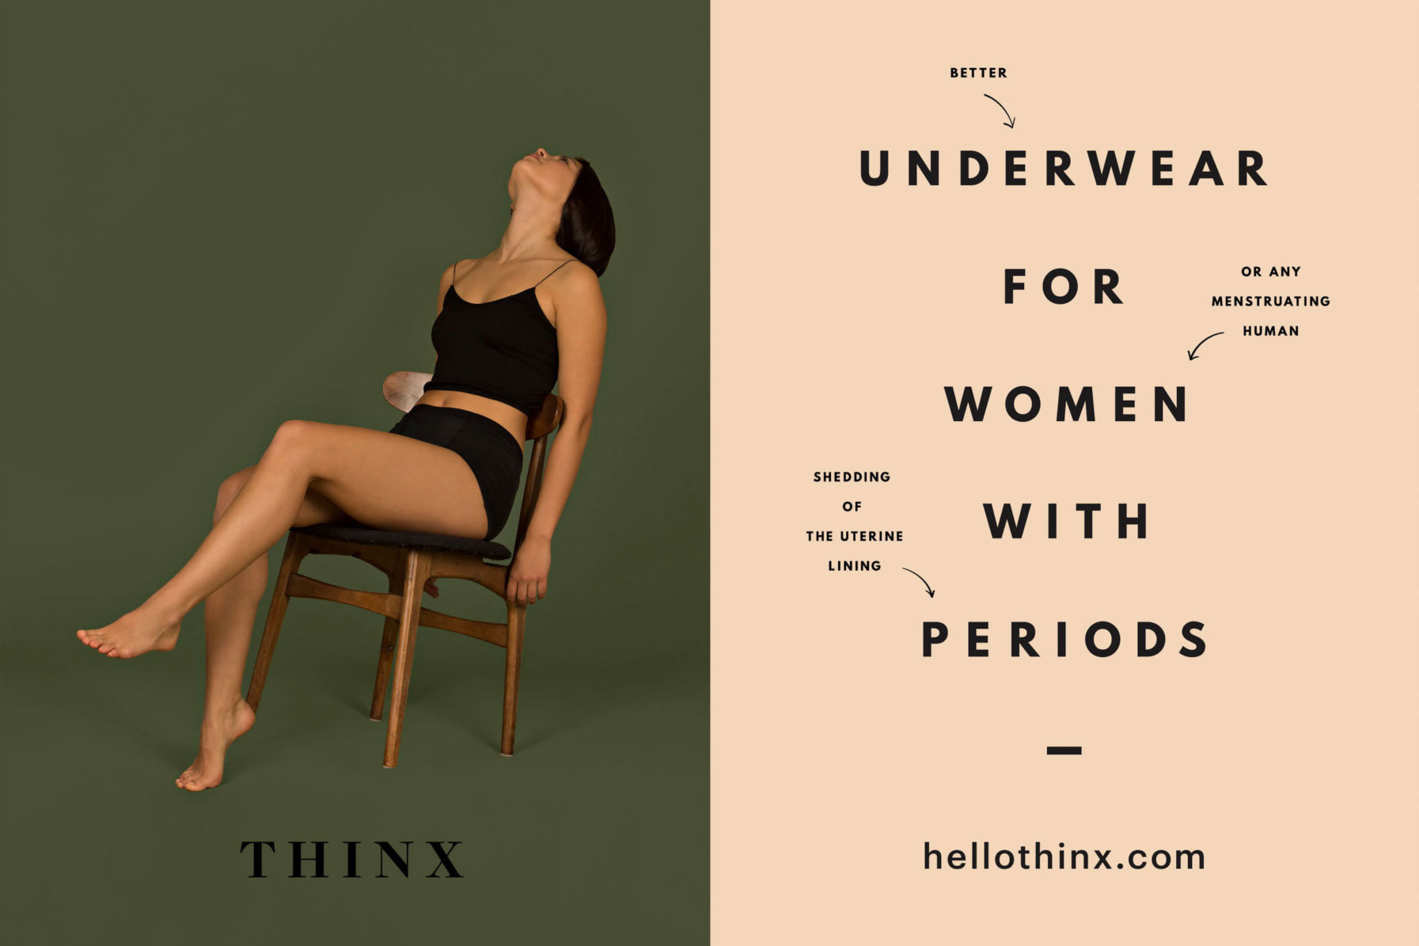 How to get the perfect measurement for your Thinx?